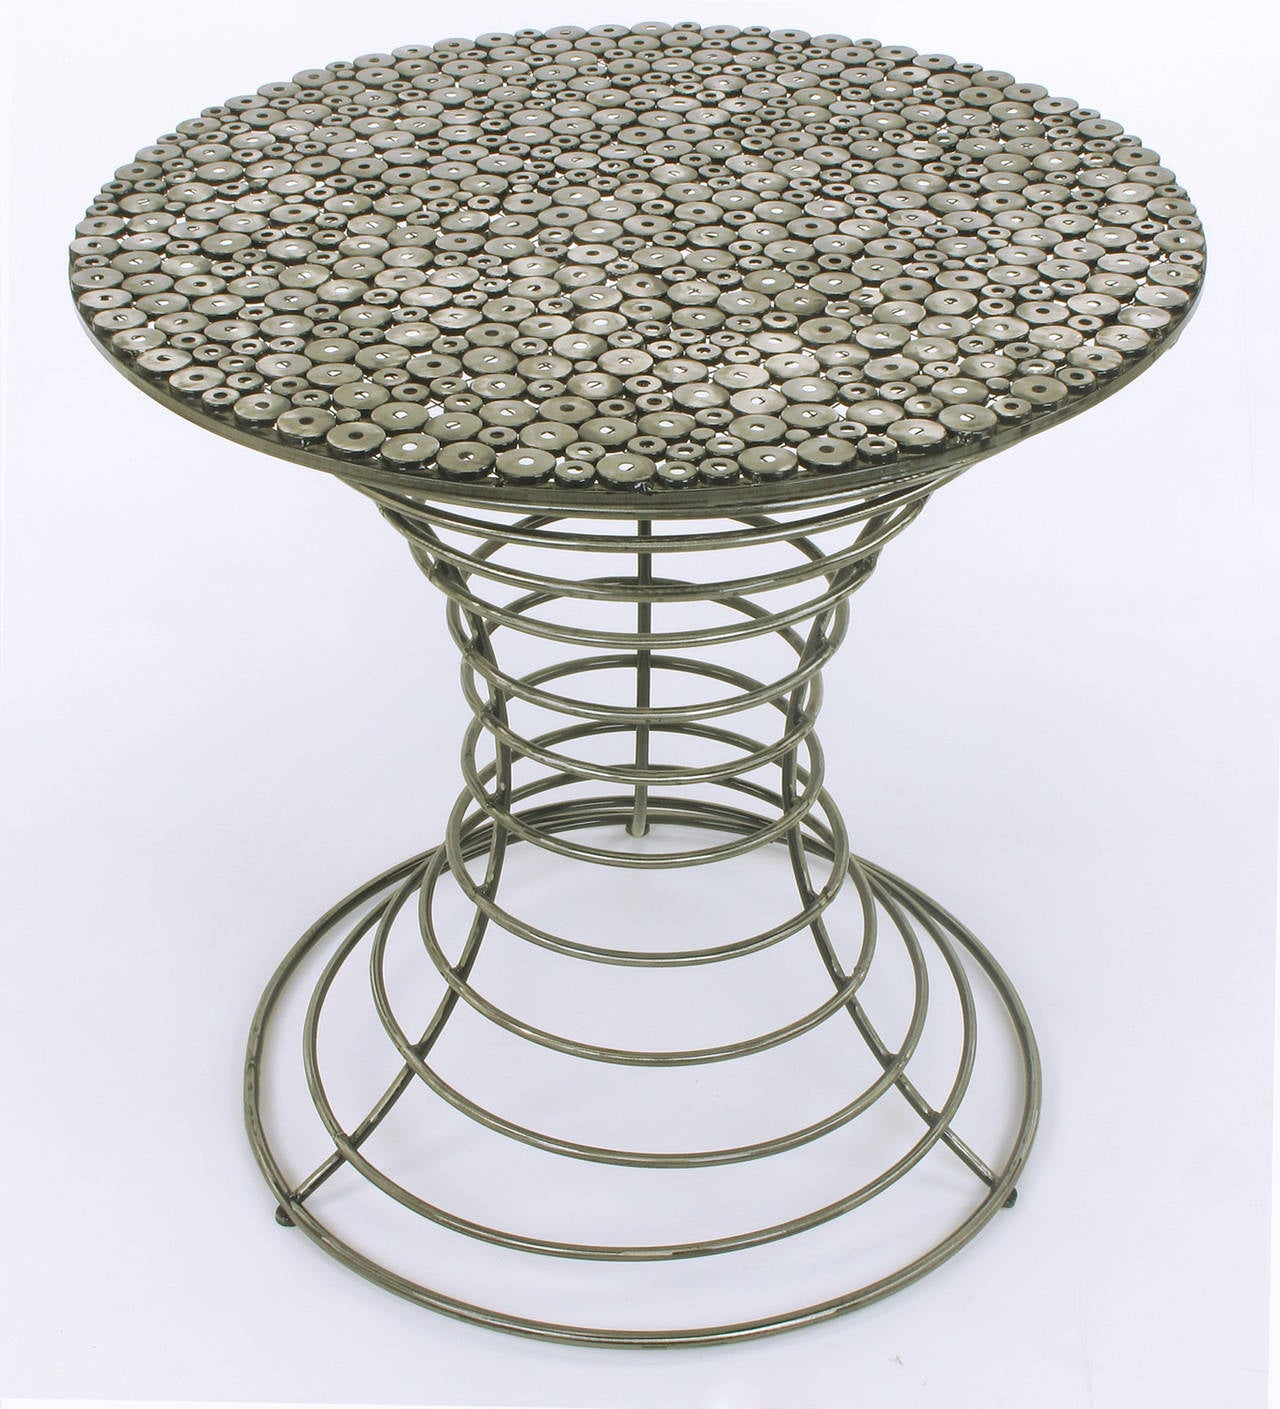 Uncommon centre or bistro size table constructed of circular metal tubes, metal washers welded to metal screen and sprayed with a translucent black lacquer to accent the curves and nonlinear aspects to this unique table.